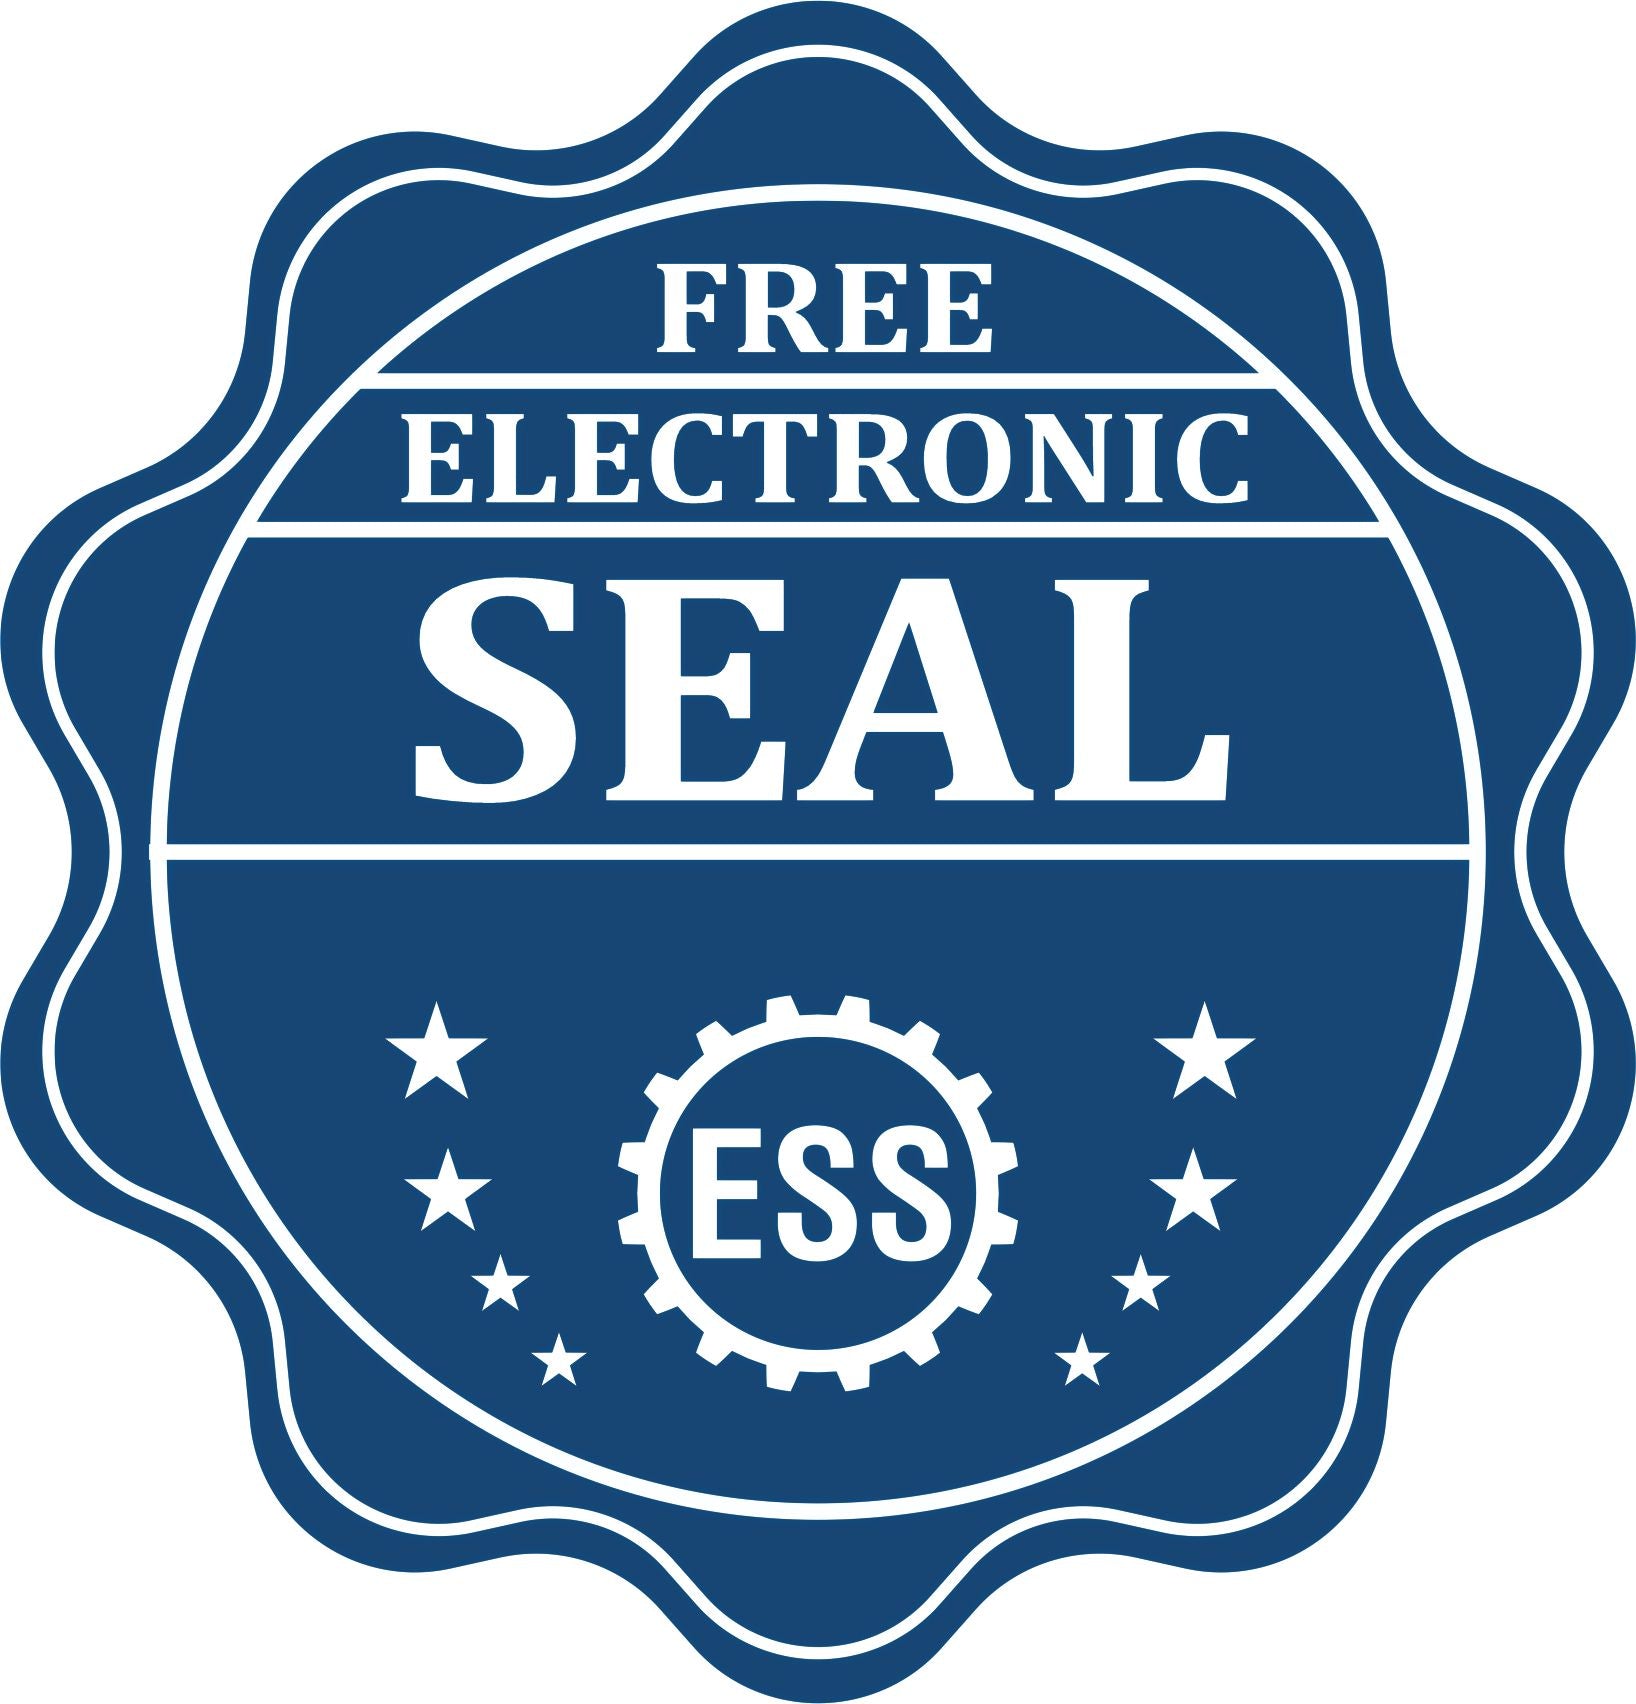 A badge showing a free electronic seal for the Slim Pre-Inked State Seal Notary Stamp for Alabama with stars and the ESS gear on the emblem.